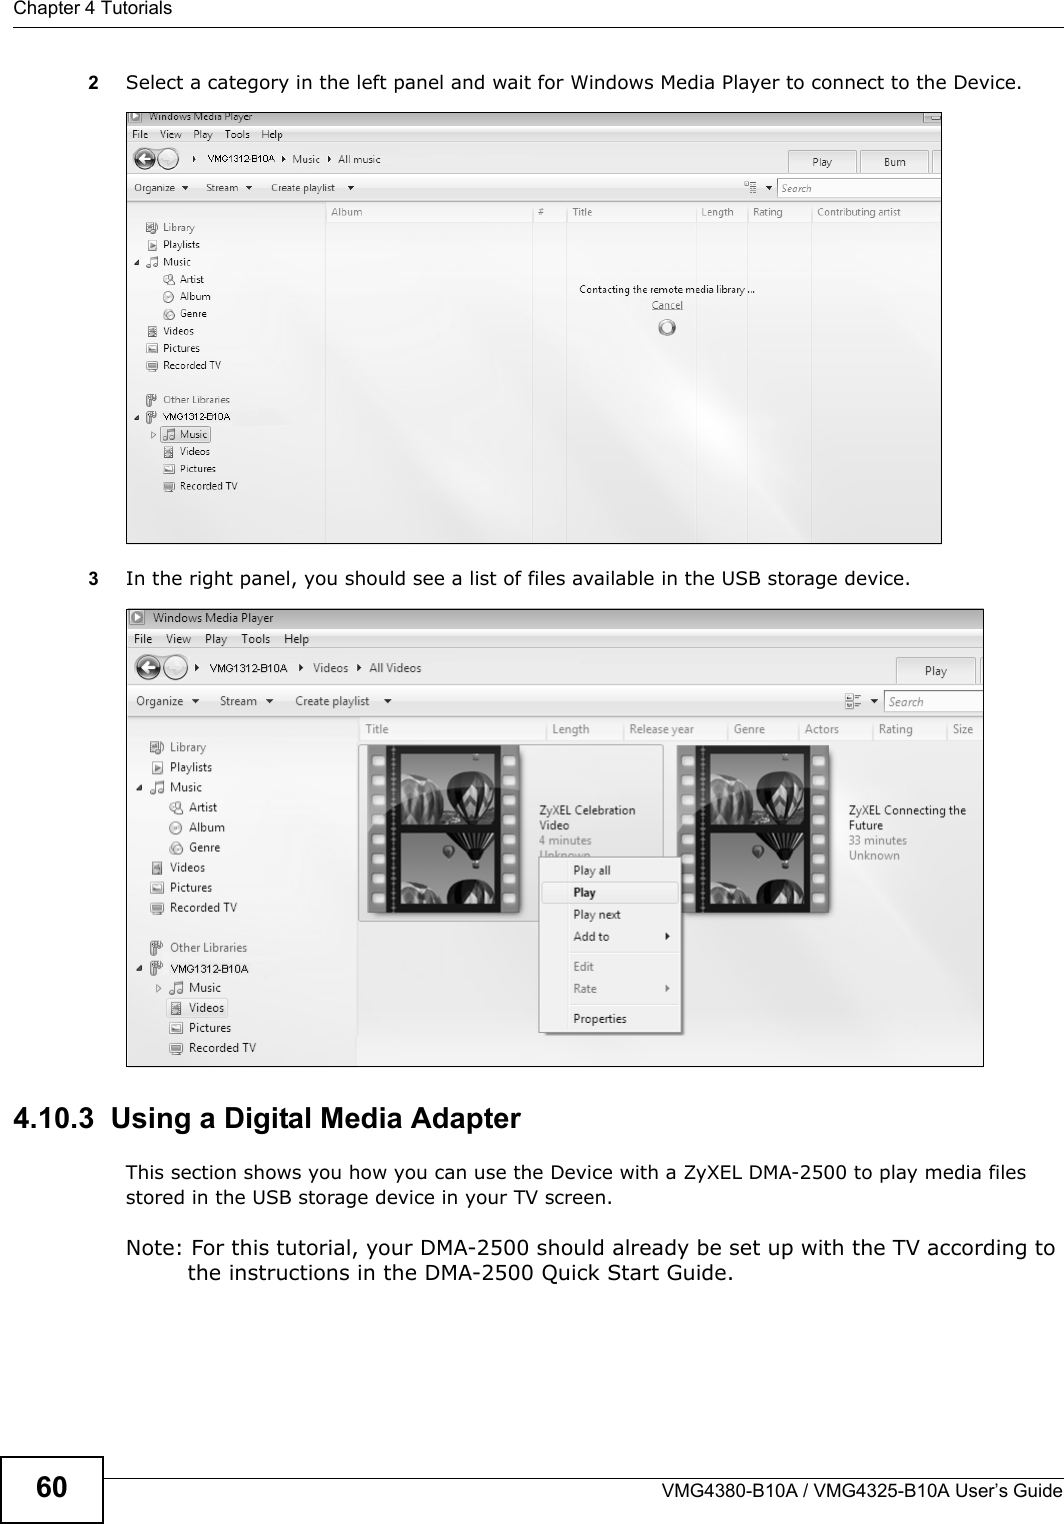 Chapter 4 TutorialsVMG4380-B10A / VMG4325-B10A User’s Guide602Select a category in the left panel and wait for Windows Media Player to connect to the Device.Tutorial: Media Sharing using Windows 7 (2)3In the right panel, you should see a list of files available in the USB storage device. Tutorial: Media Sharing using Windows 7 (2)4.10.3  Using a Digital Media AdapterThis section shows you how you can use the Device with a ZyXEL DMA-2500 to play media files stored in the USB storage device in your TV screen.Note: For this tutorial, your DMA-2500 should already be set up with the TV according to the instructions in the DMA-2500 Quick Start Guide.